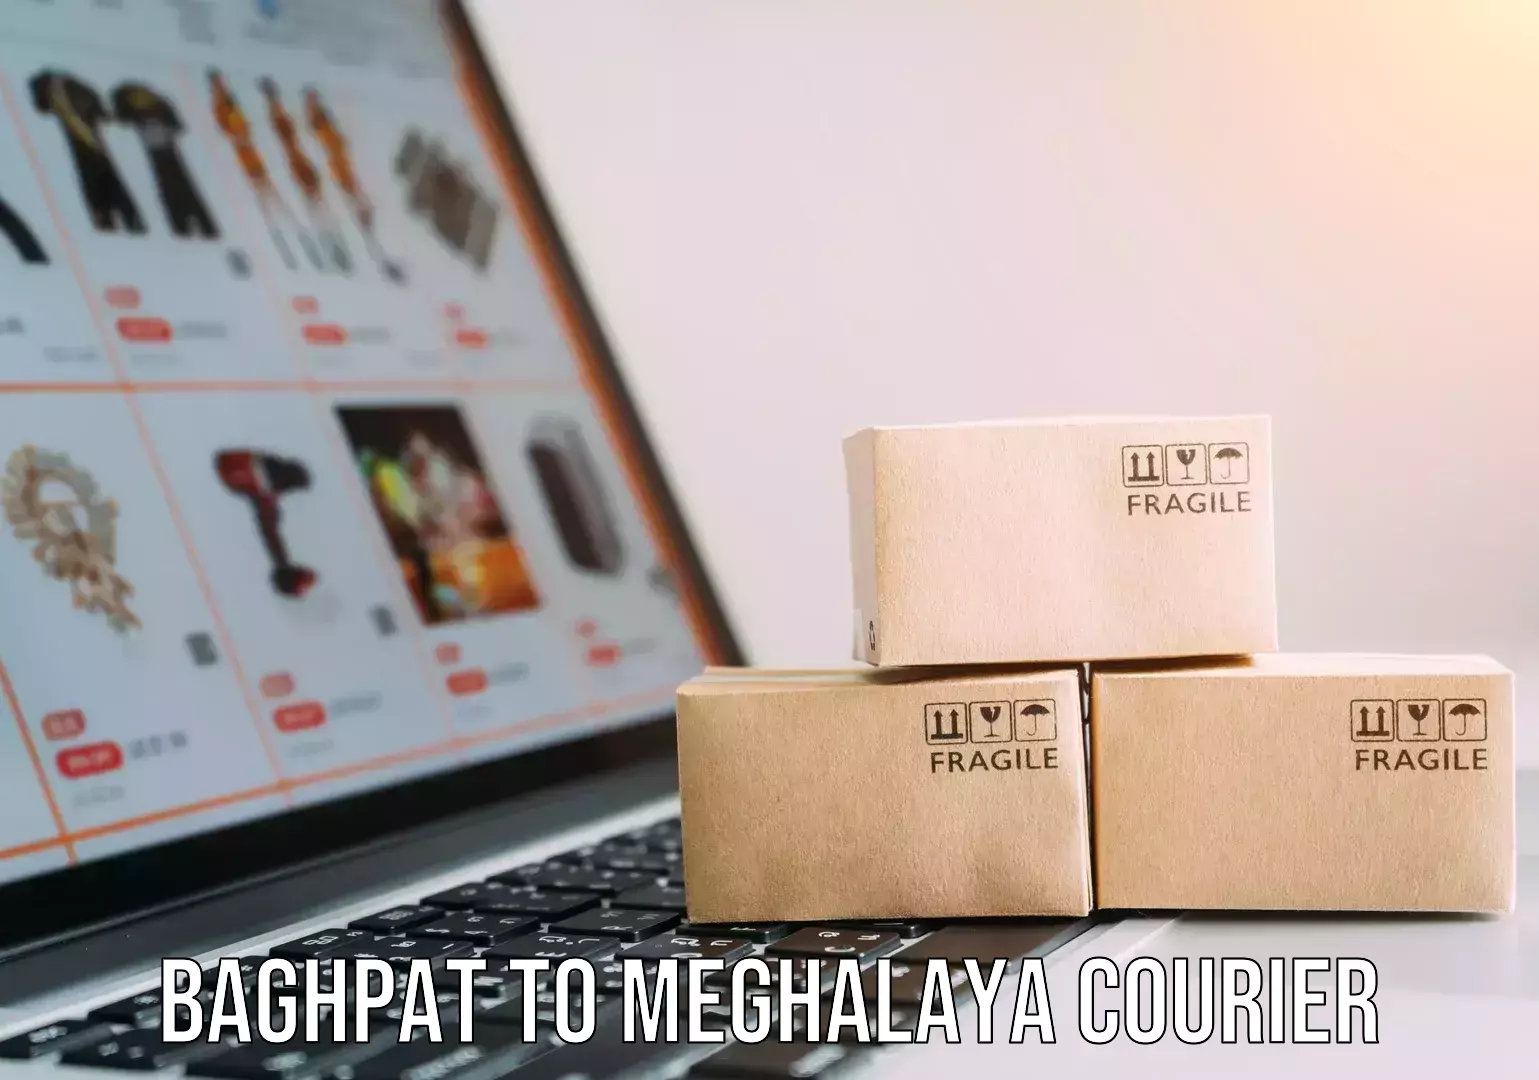 Advanced shipping network in Baghpat to Meghalaya